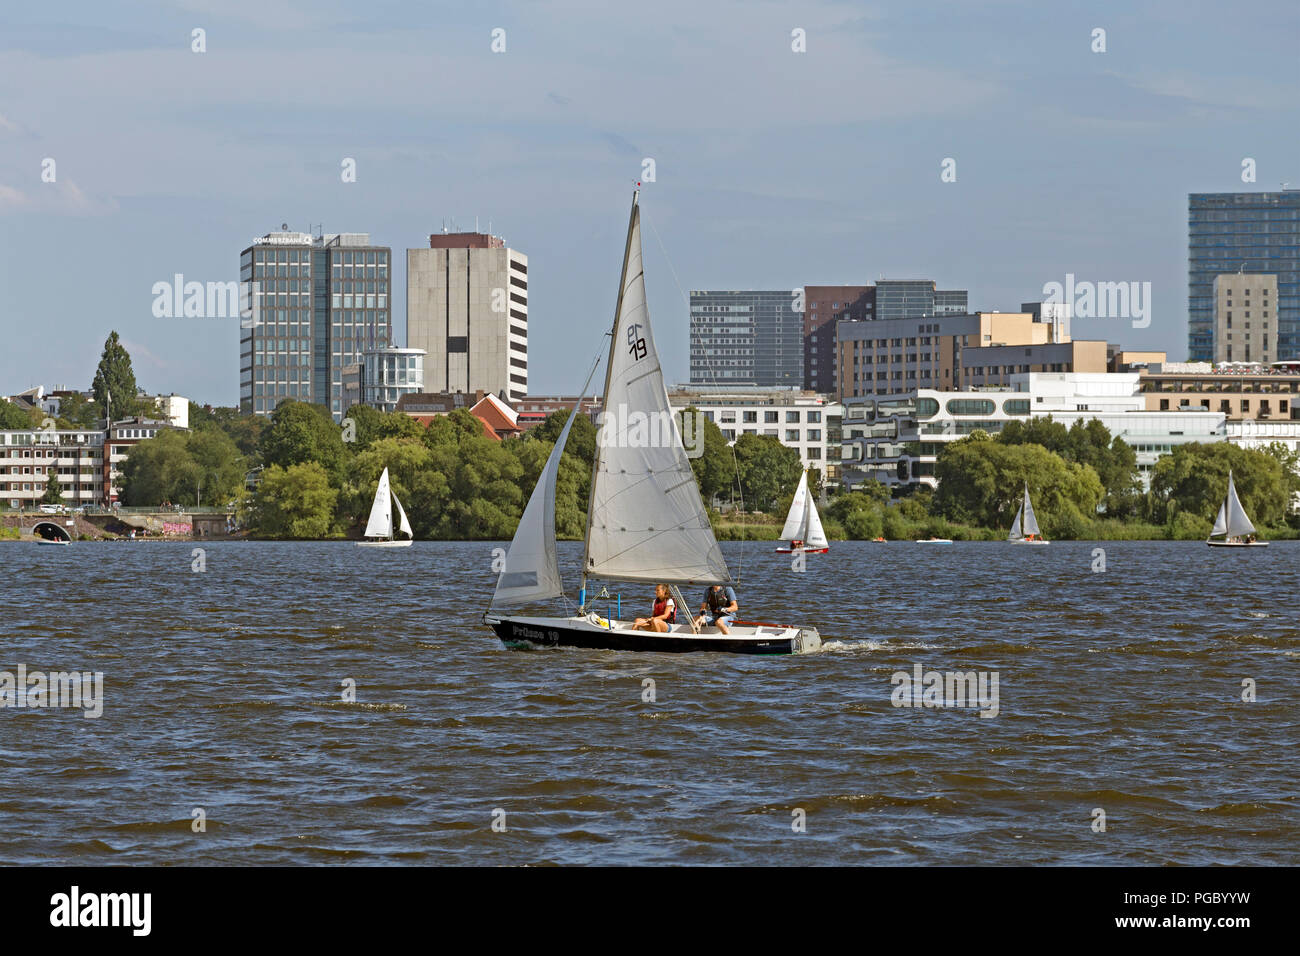 sailing boat, lake Außenalster (Outer Alster), Hamburg, Germany Stock Photo